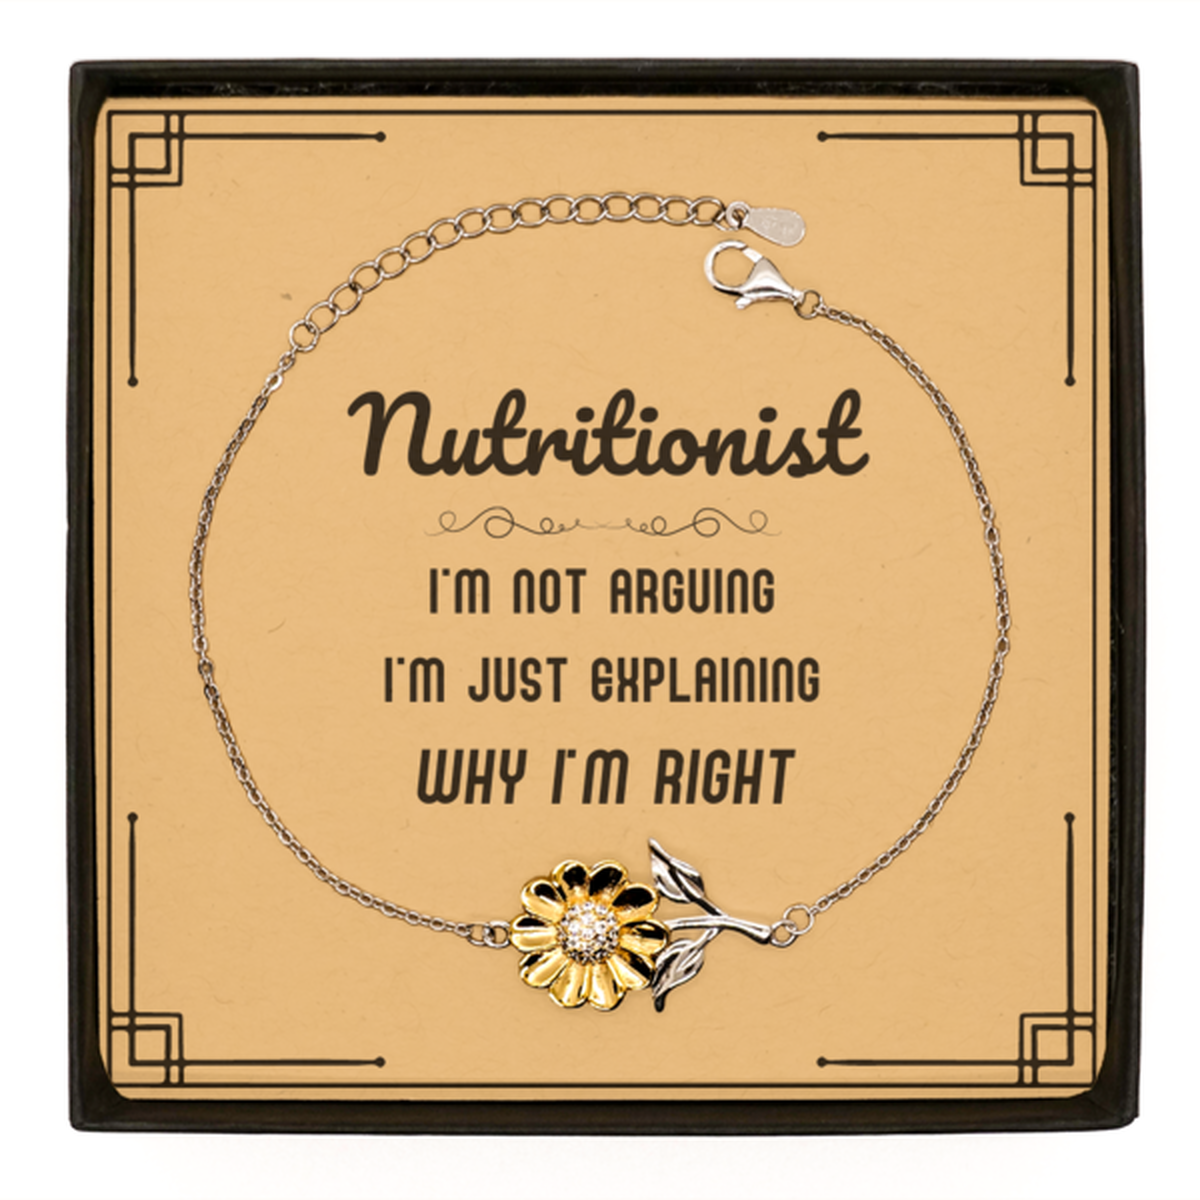 Nutritionist I'm not Arguing. I'm Just Explaining Why I'm RIGHT Sunflower Bracelet, Funny Saying Quote Nutritionist Gifts For Nutritionist Message Card Graduation Birthday Christmas Gifts for Men Women Coworker